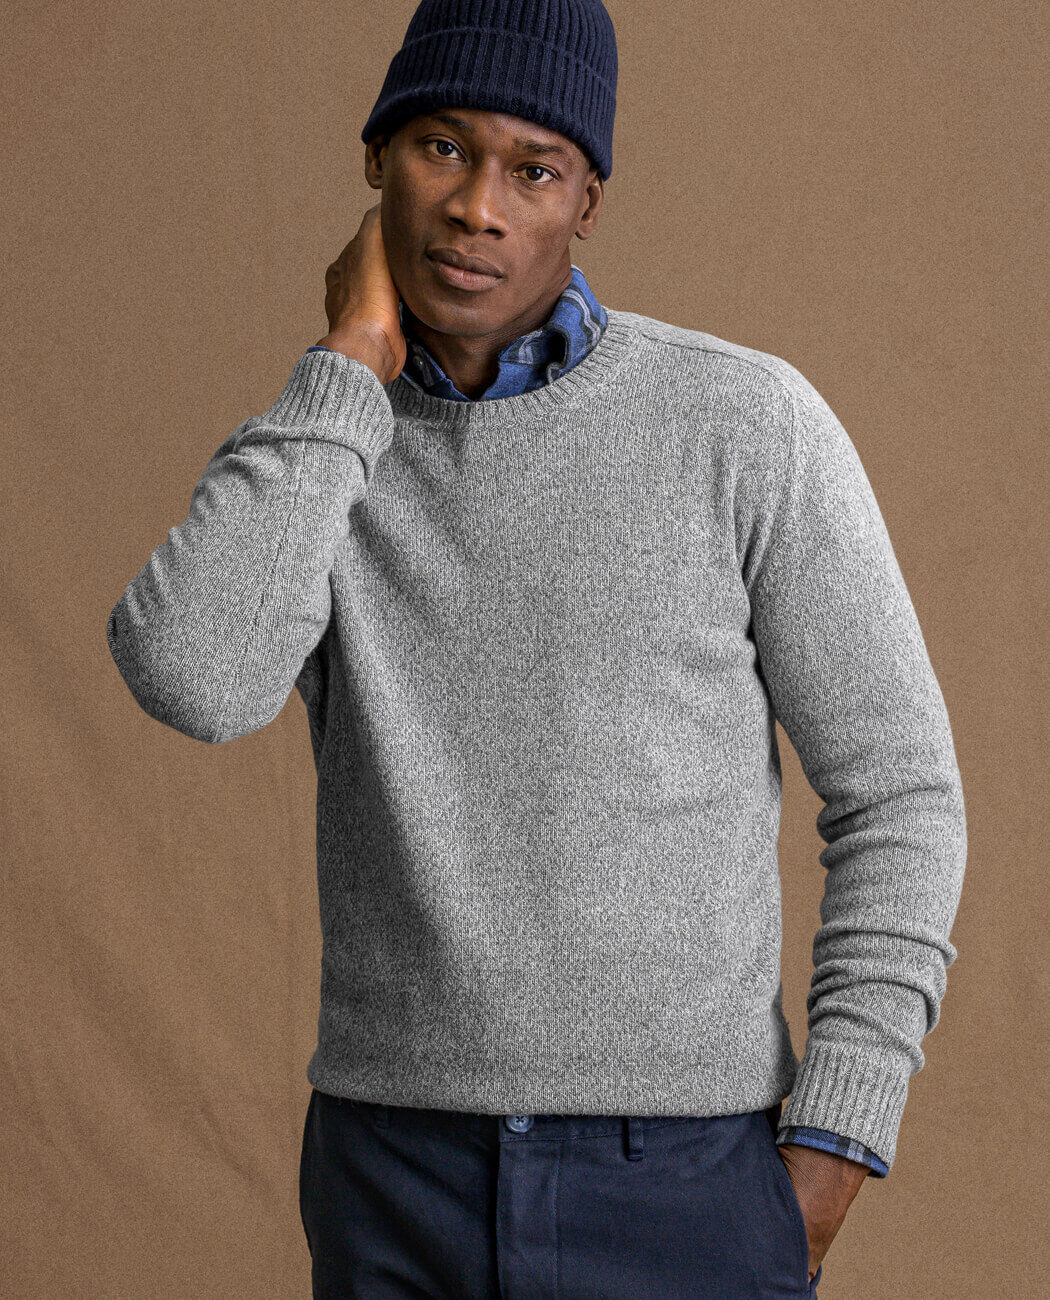 Look: The Merino and Cashmere Sweater Zoomed